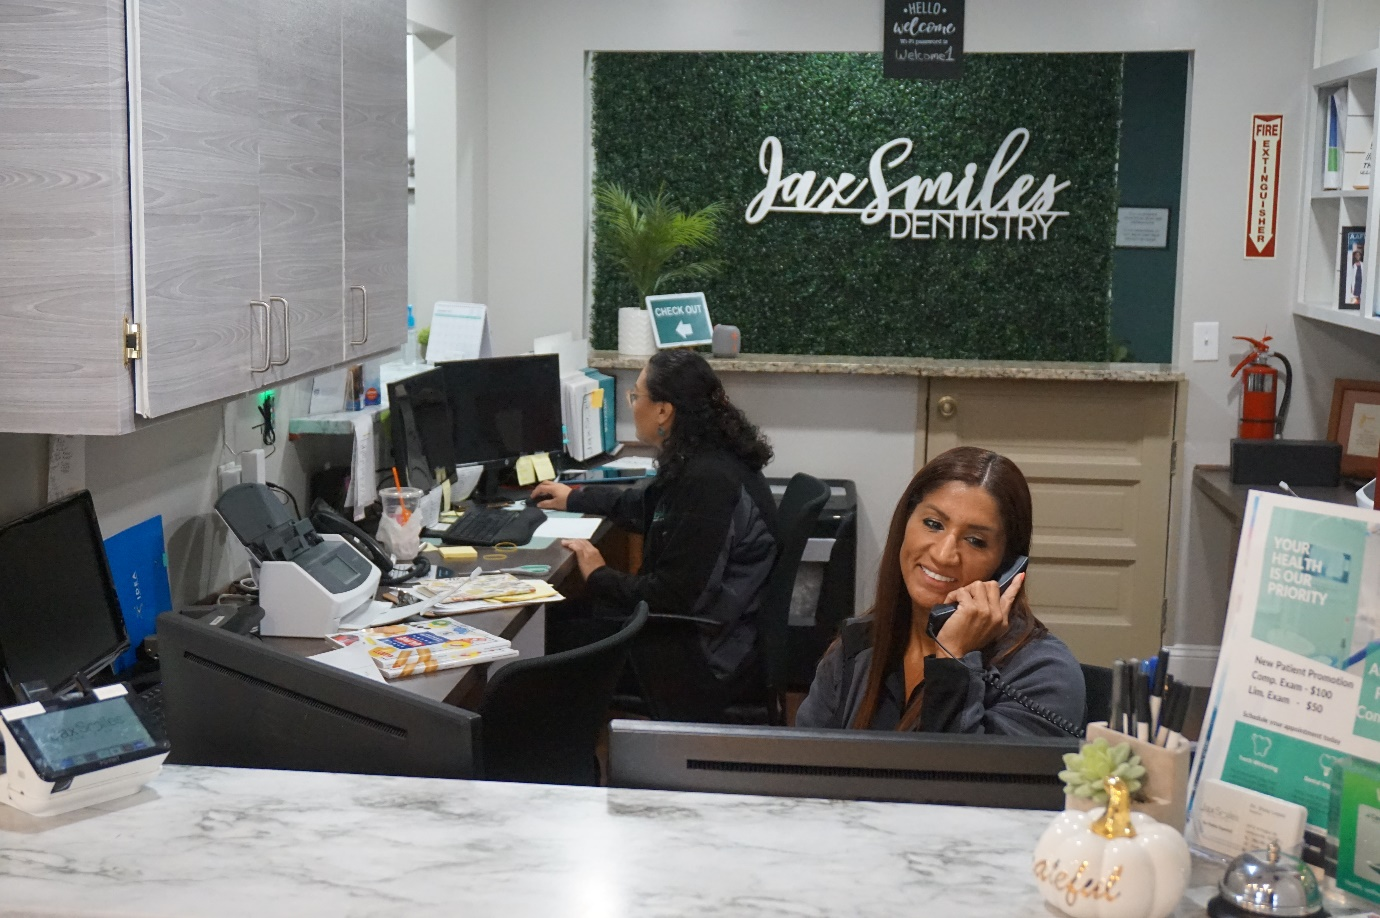 A receptionist at Jax Smiles Dentistry smiling while on call.